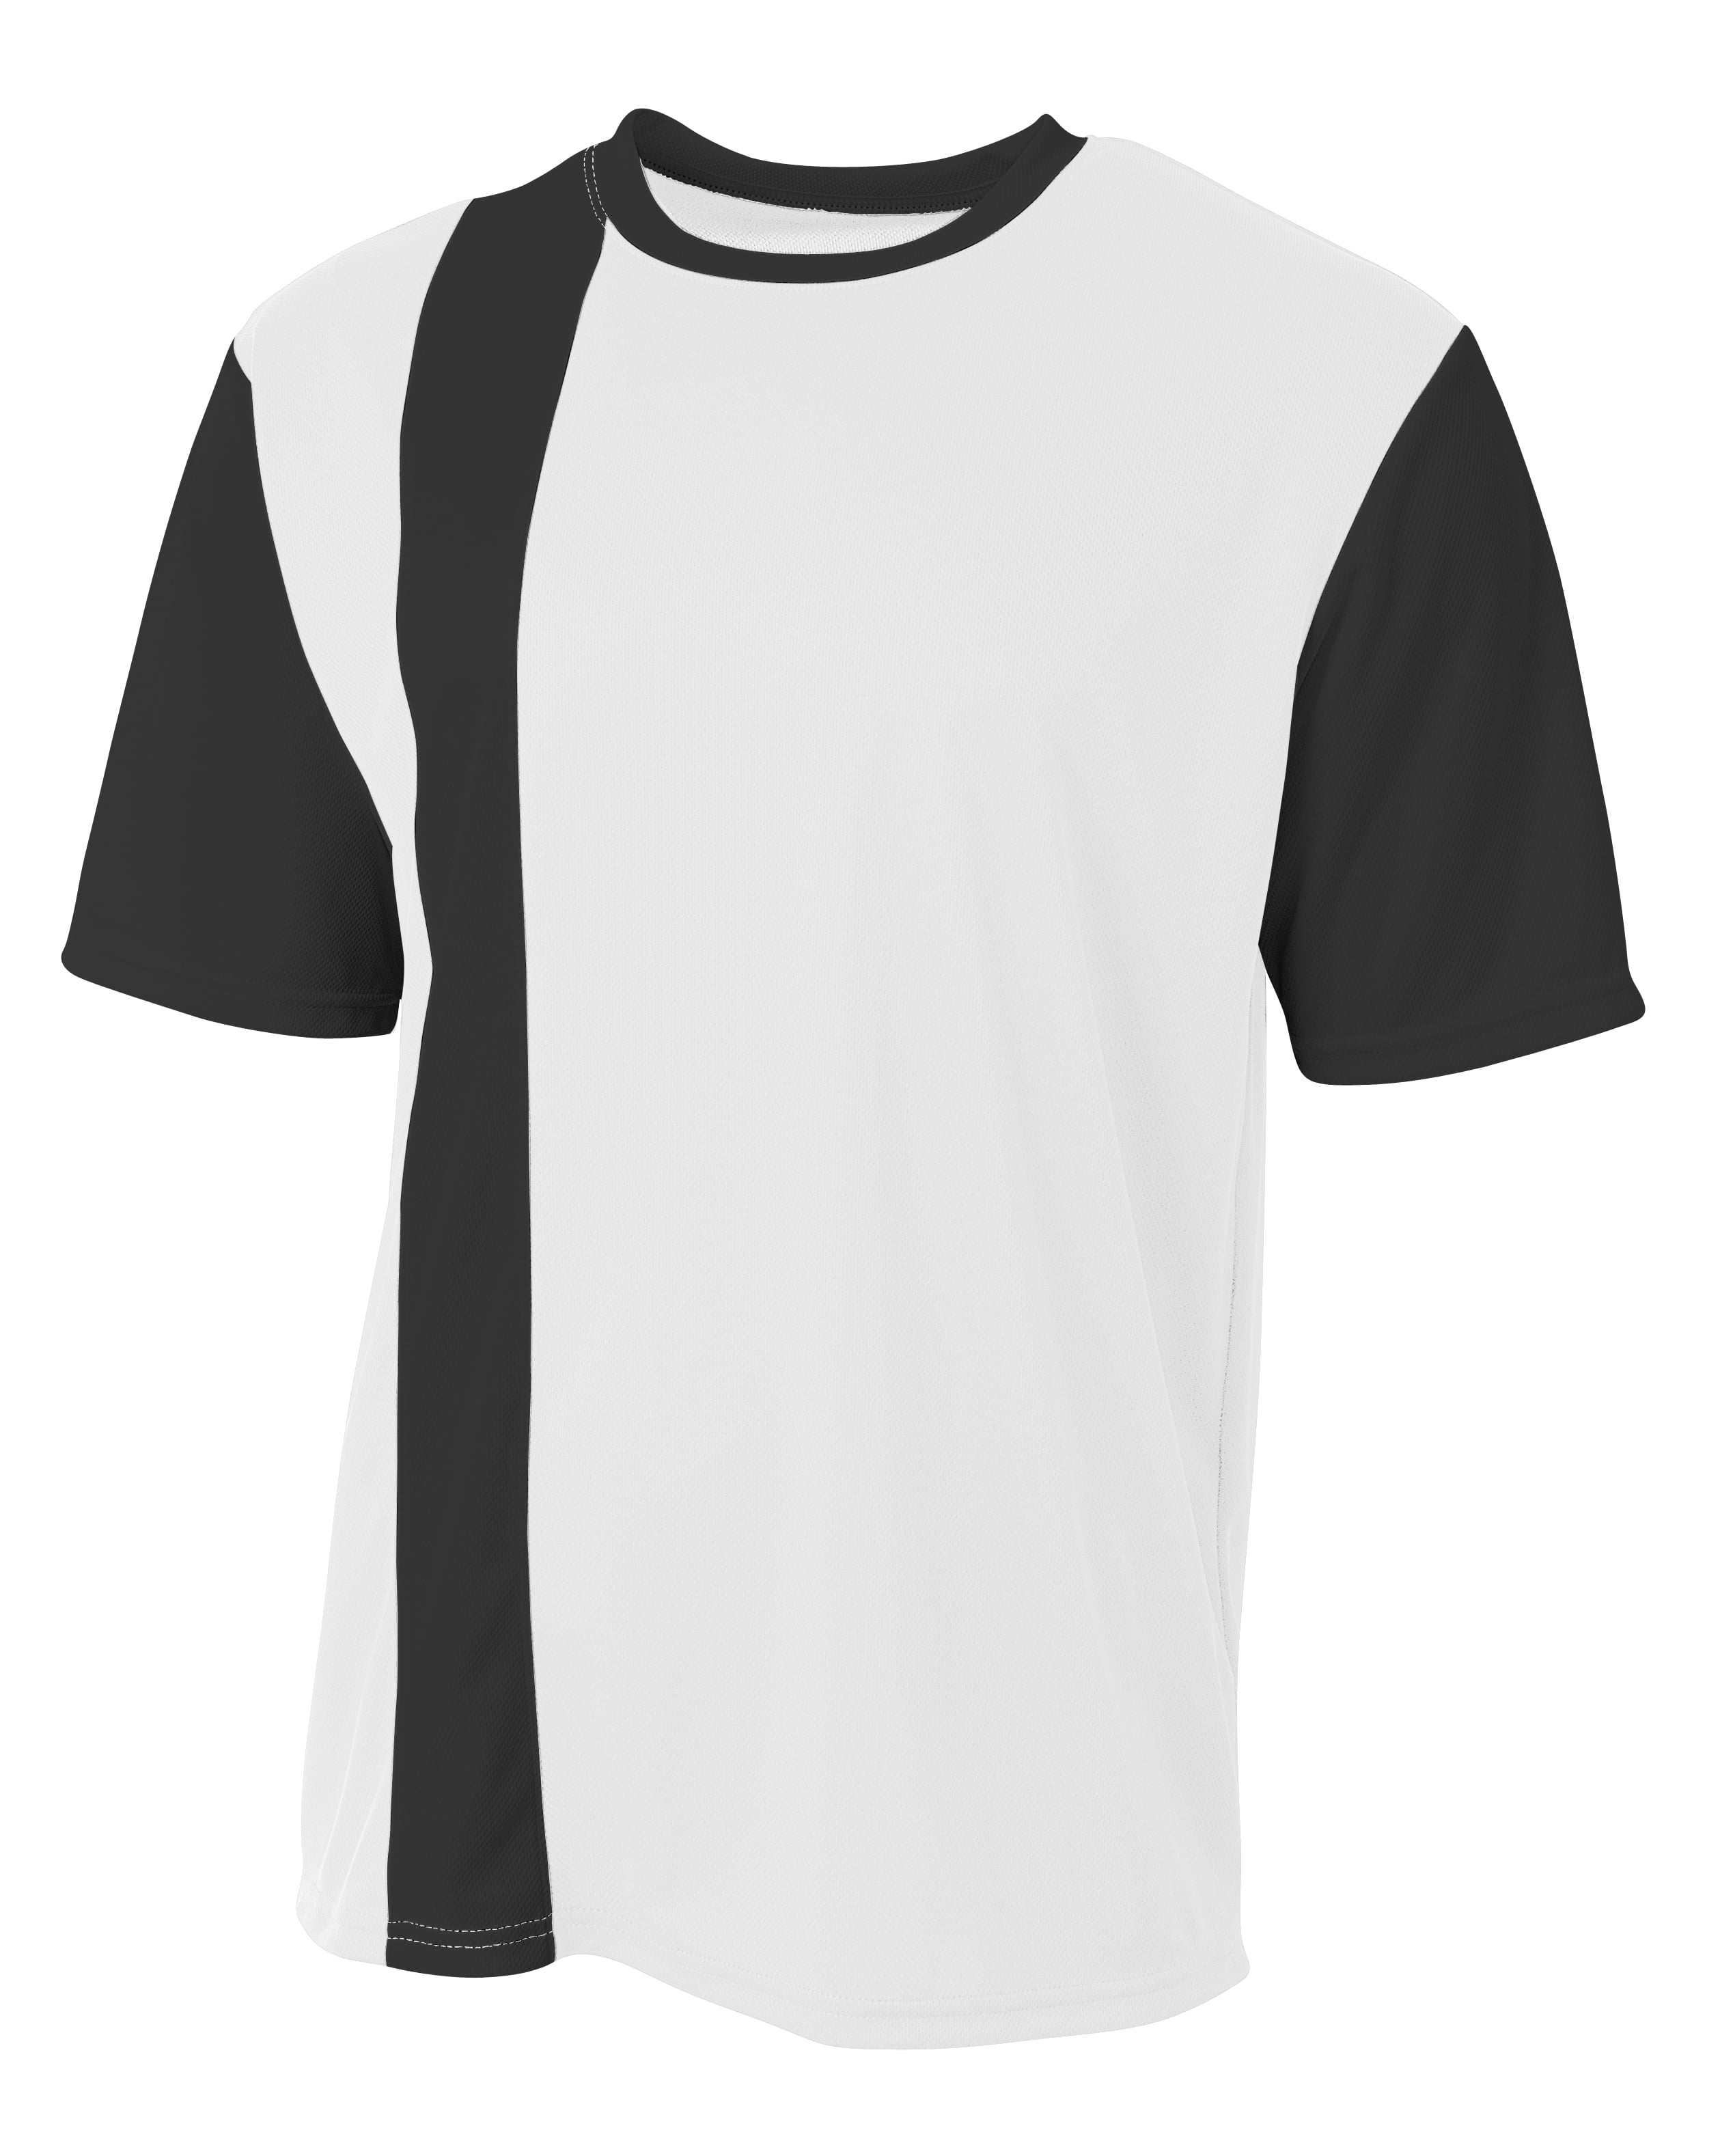 A4 Sportswear Soccer Front-Striped 2-Color Moisture Wicking Lightweight Breathable Mesh Jersey 